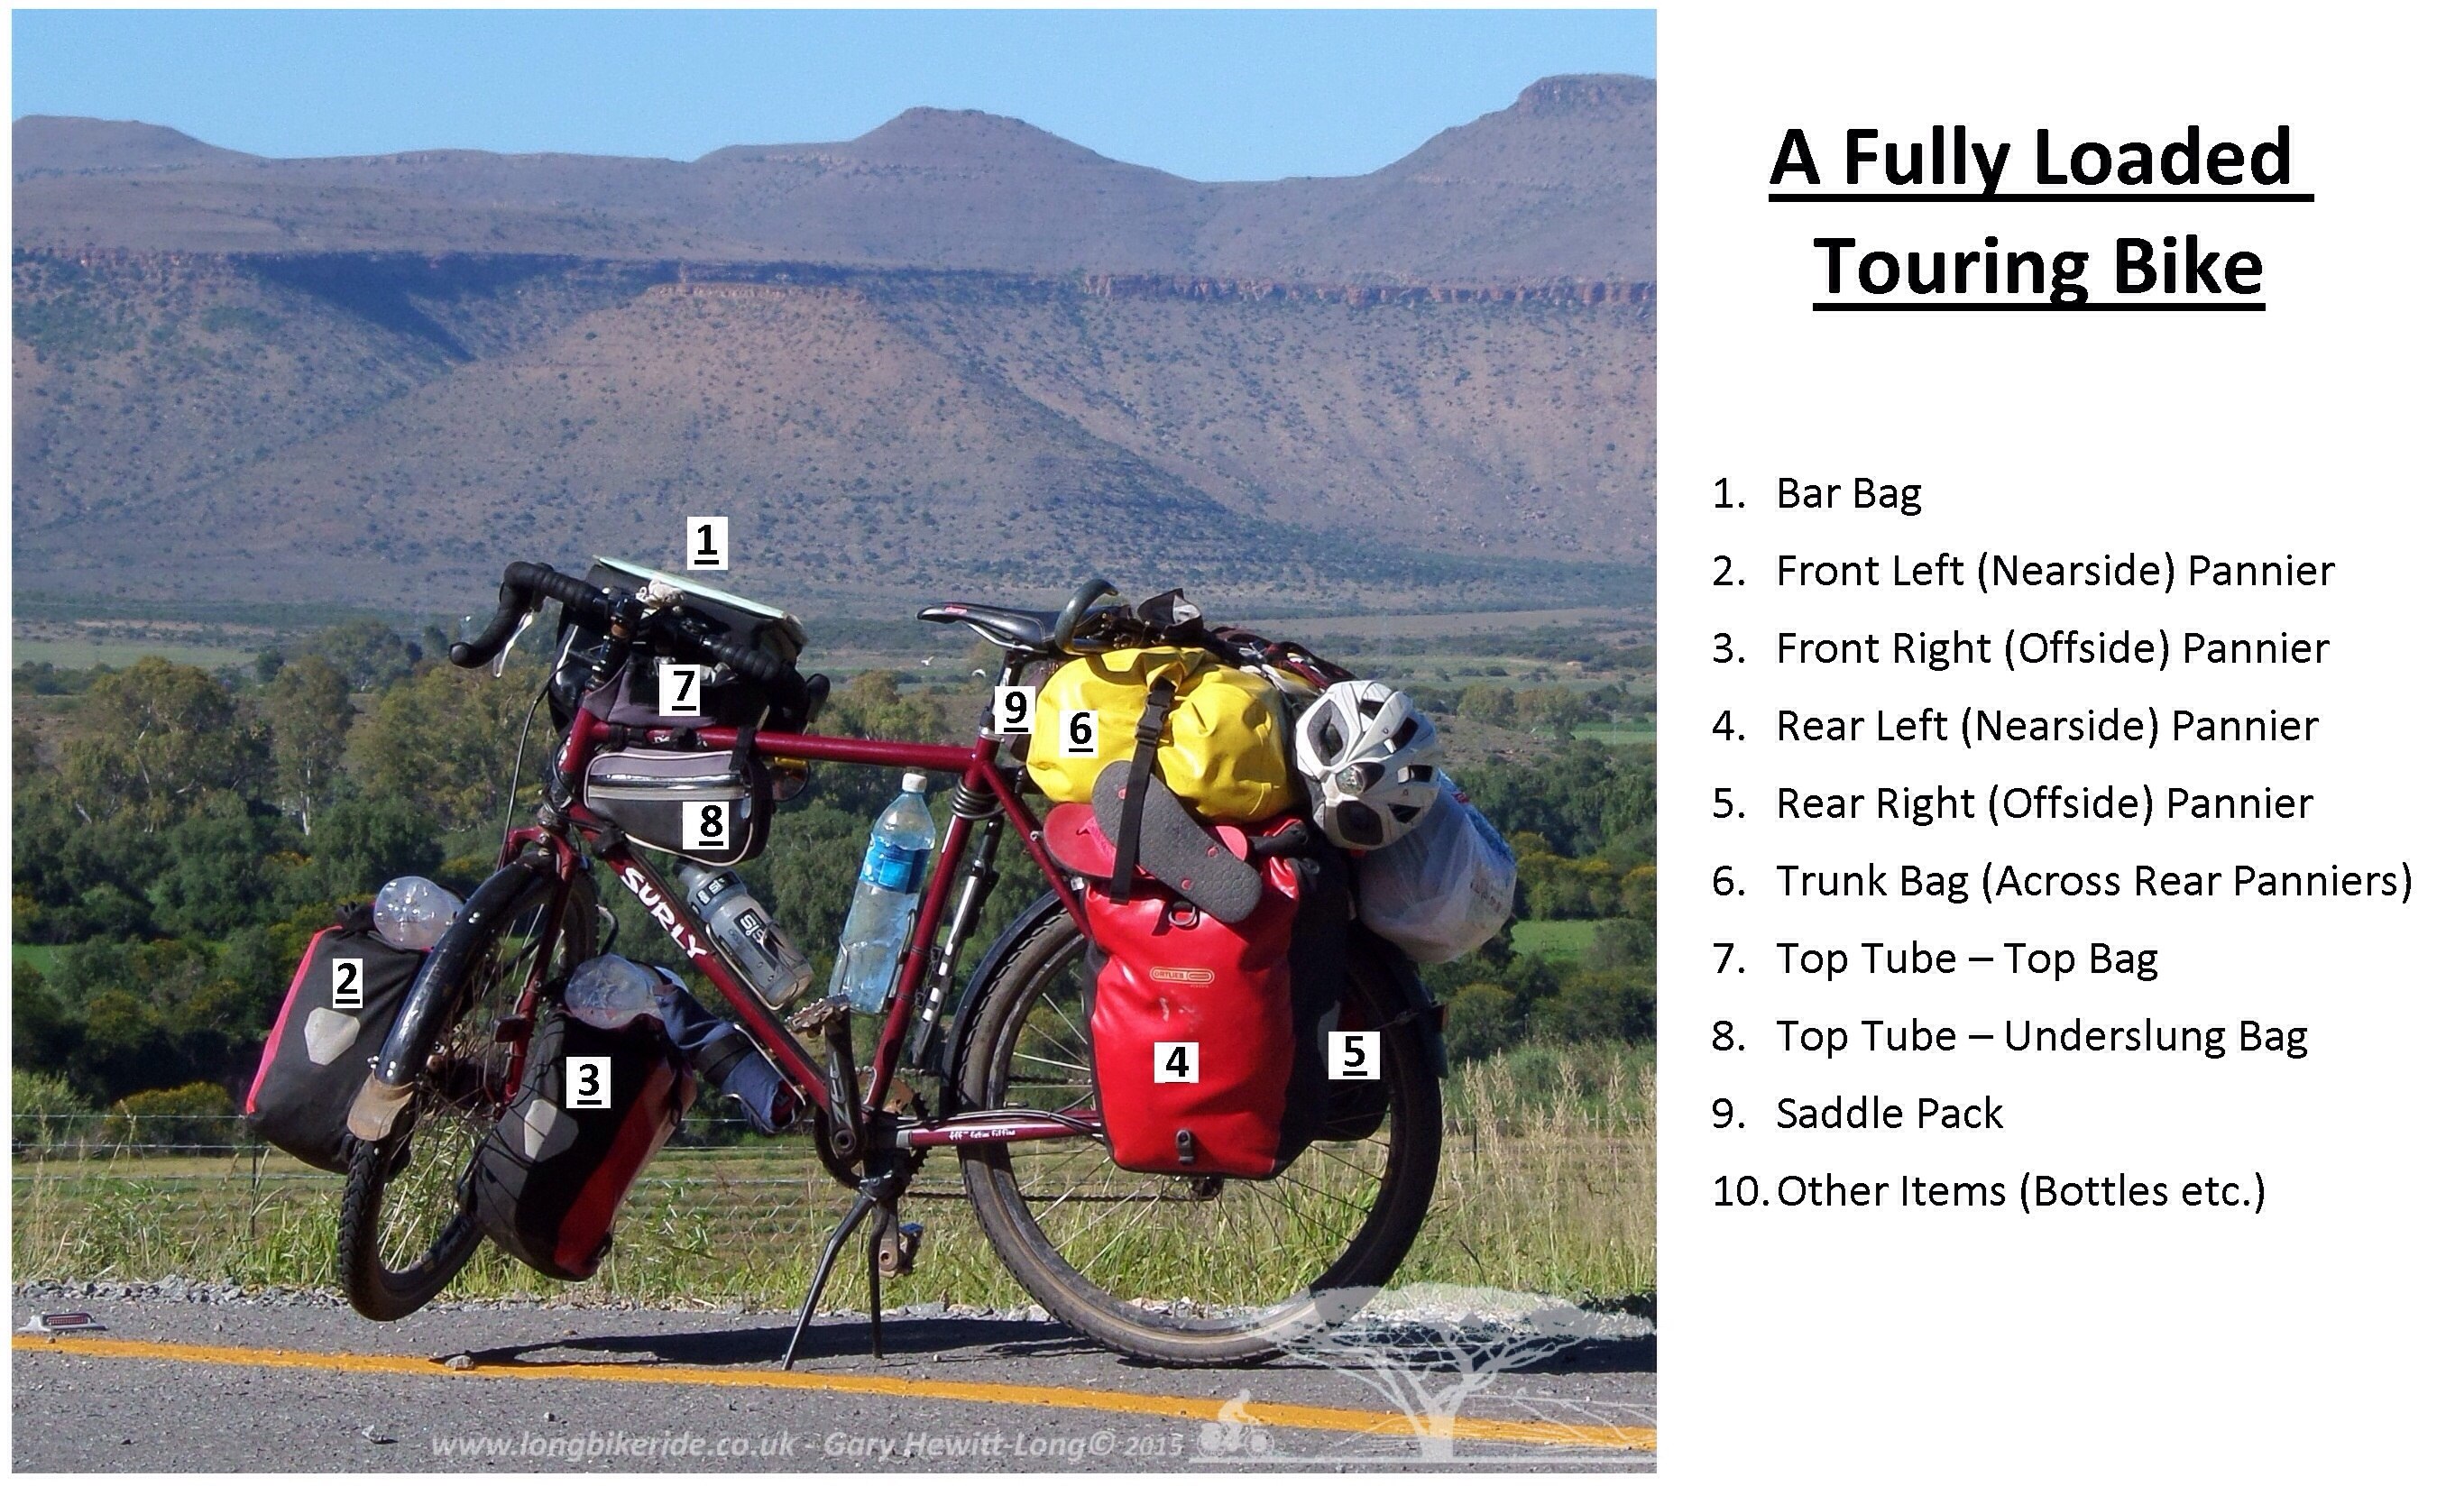 How to Load a Touring Bike